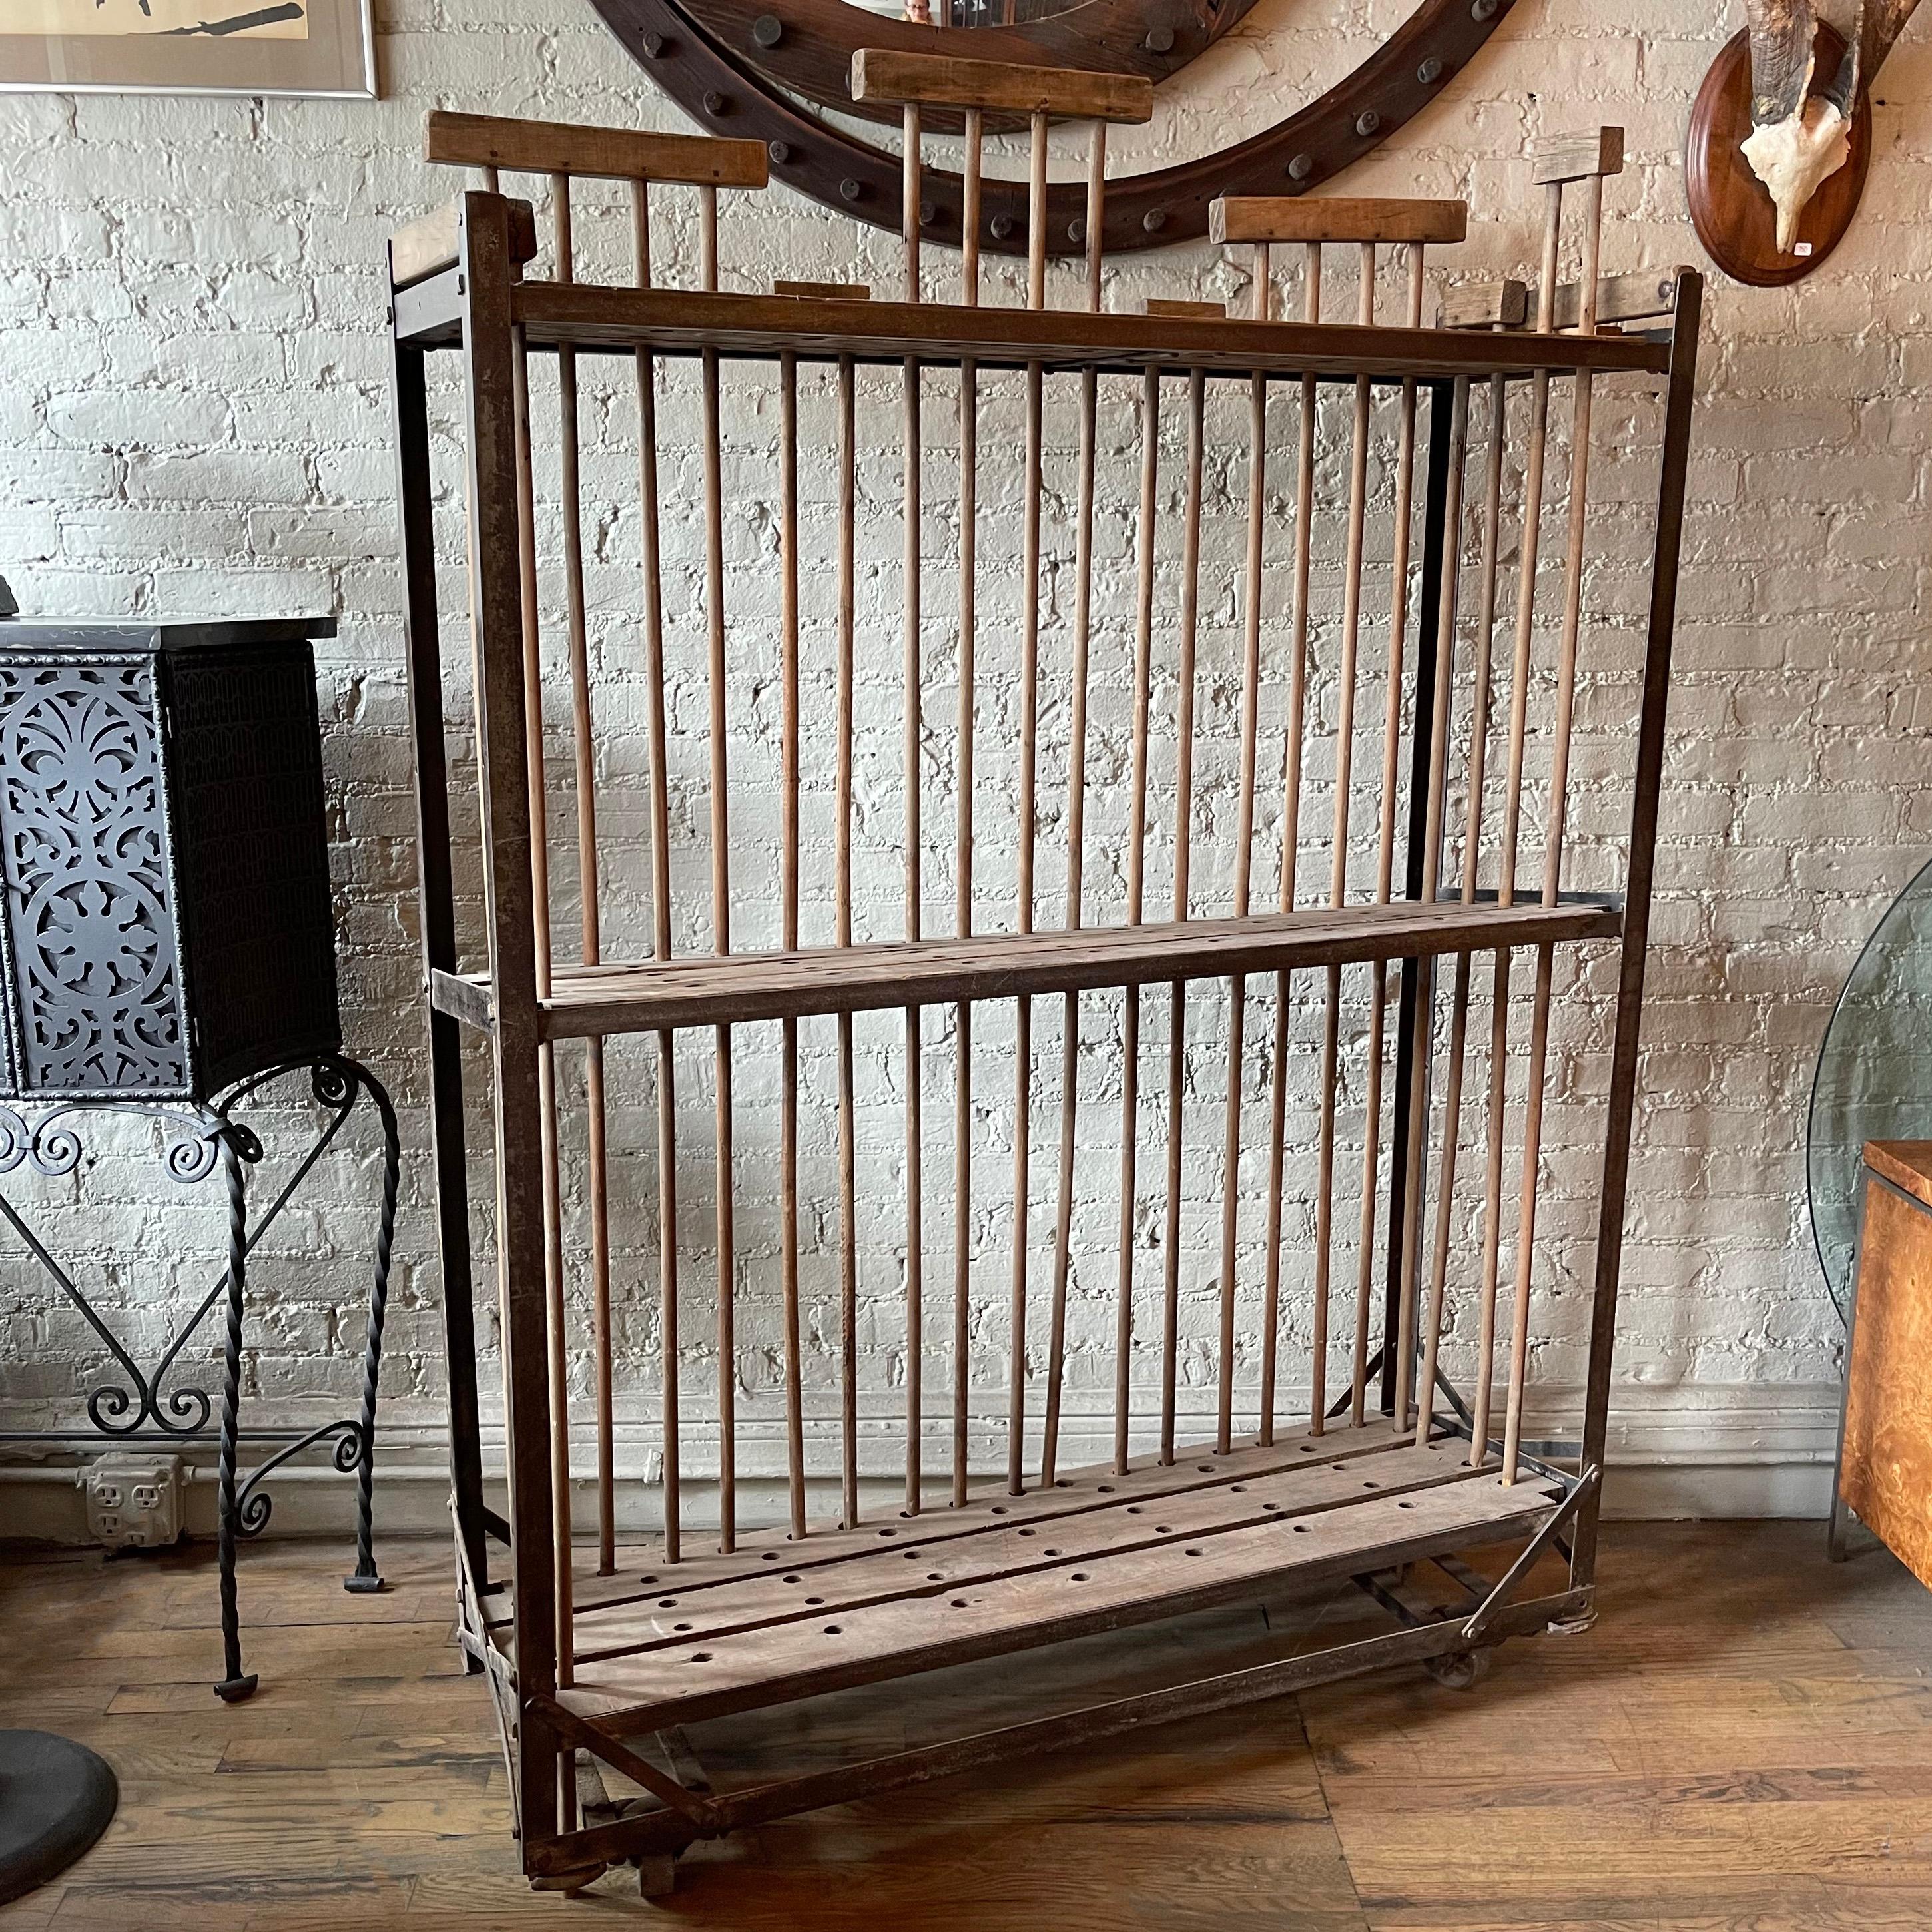 Rustic, industrial, rolling rack features 3 perforated shelves in an angle iron frame. The top shelf is 58 inches height. The bottom 2 shelves are slanted toward the back approx an inch.